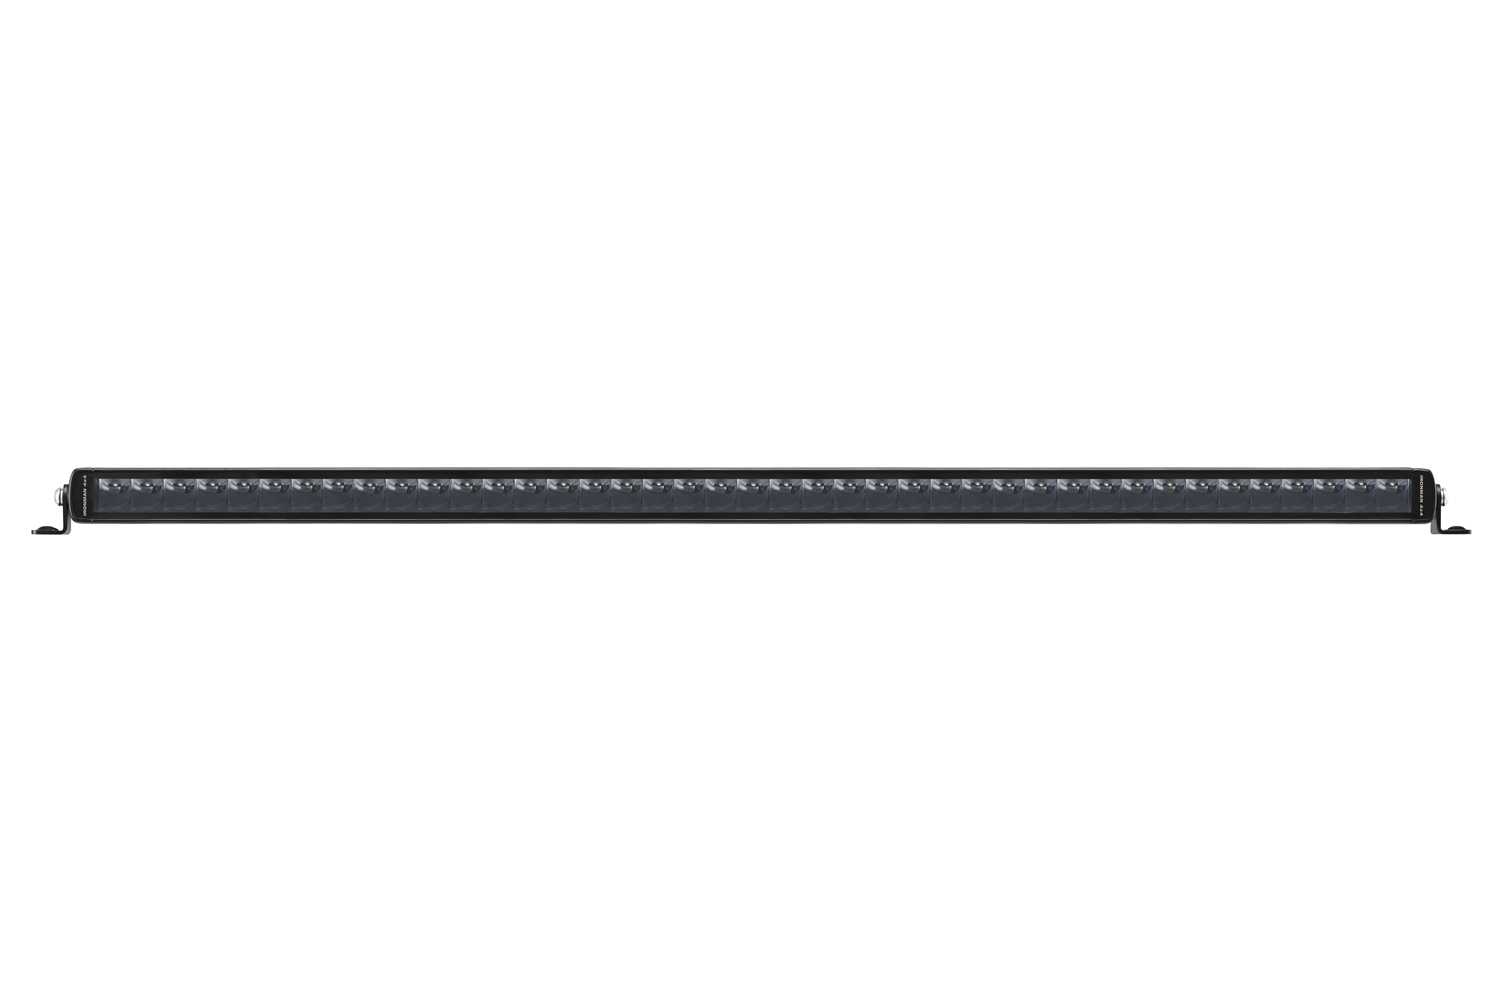 Bright Saber-X LED Single Row Light Bar - 40" Questions & Answers